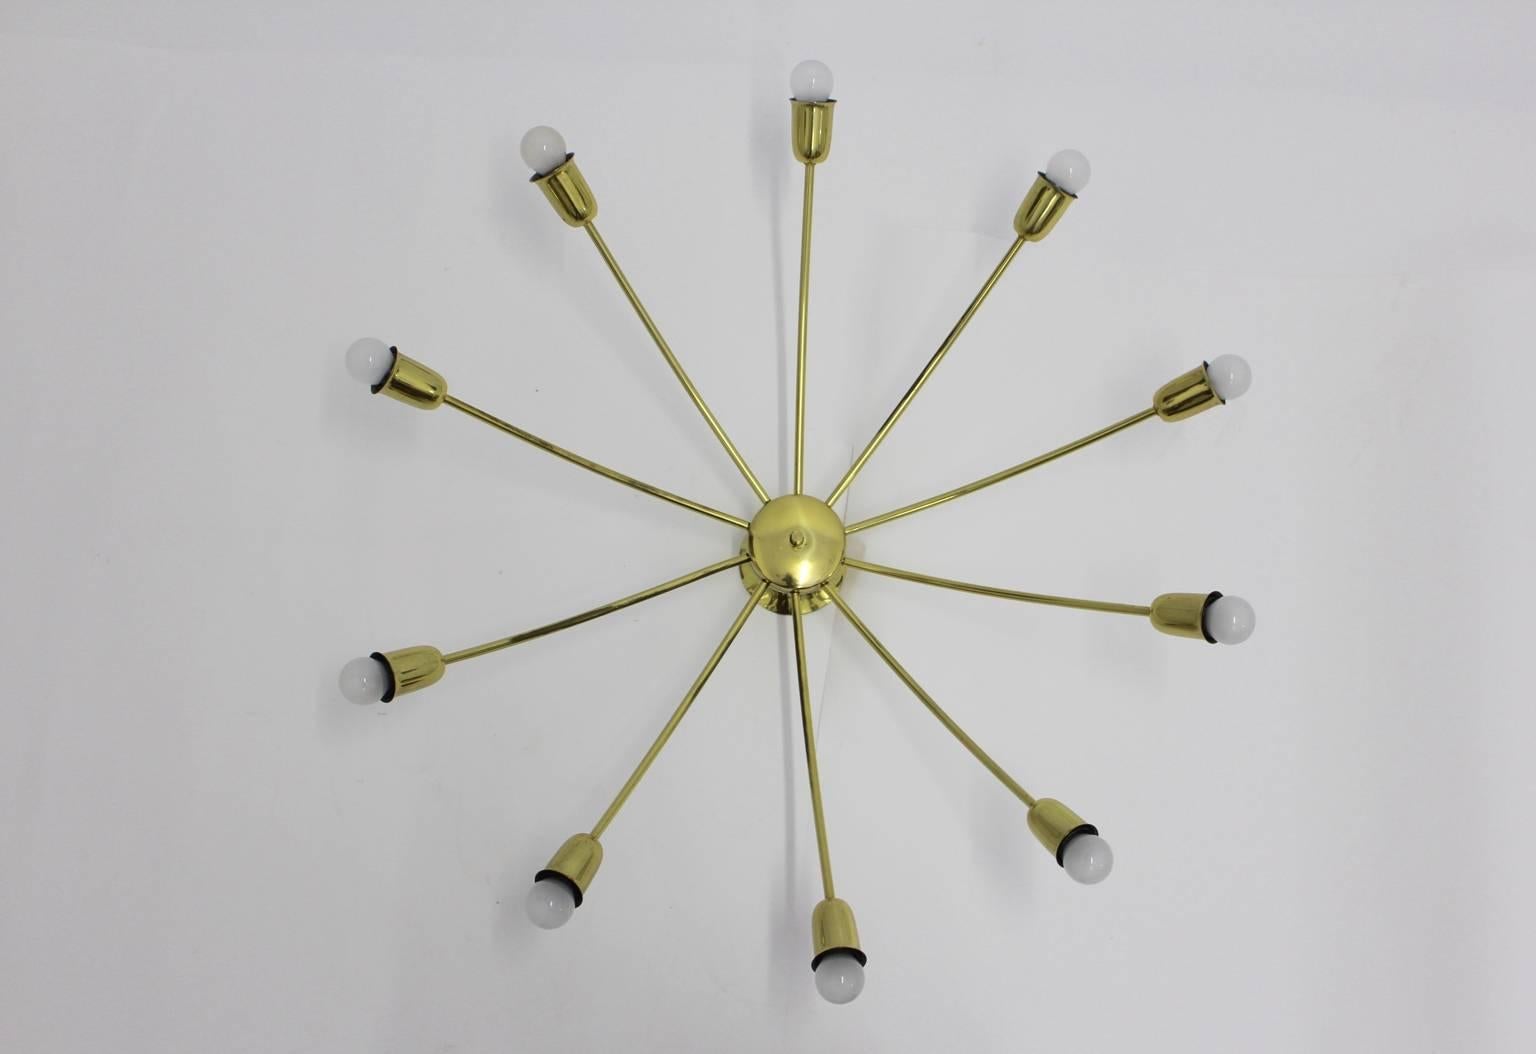 Mid Century Modern Flush Mount, which features ten curved, from up to down, brass arms with ten sockets E 14.
The ceiling lamp or flush mount was designed and executed by J. T. Kalmar, Vienna, 1950s.

Diameter: 36.22 in (92 cm).
Height: 11.02 in (28